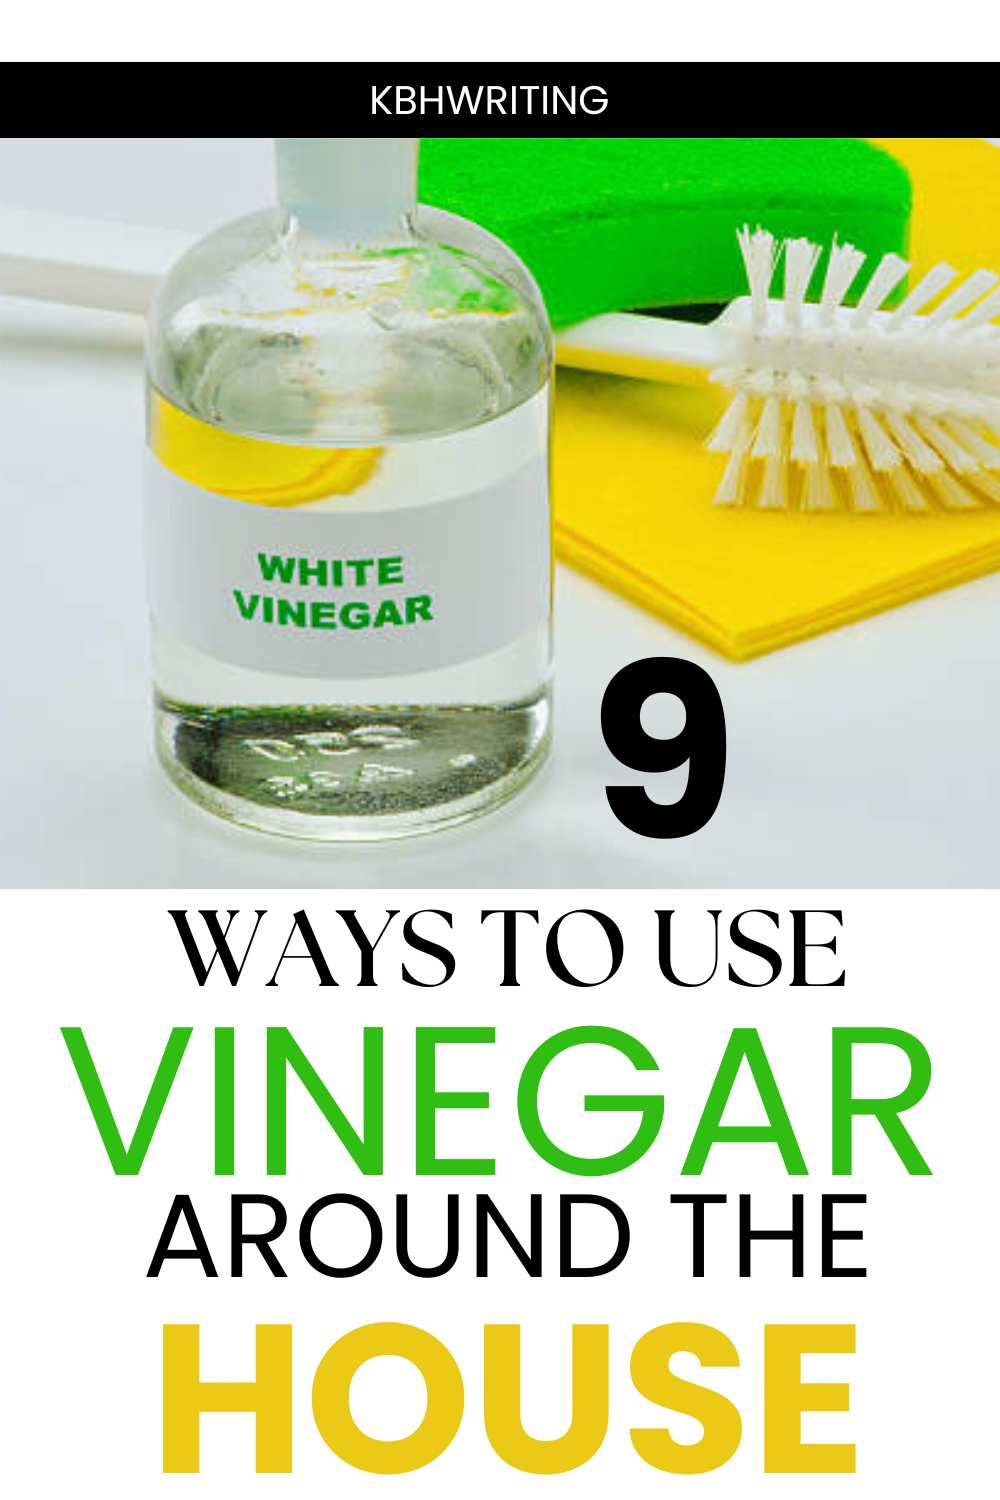 Cleaning With Vinegar Tips: 9 Things to Clean With Vinegar Around The House